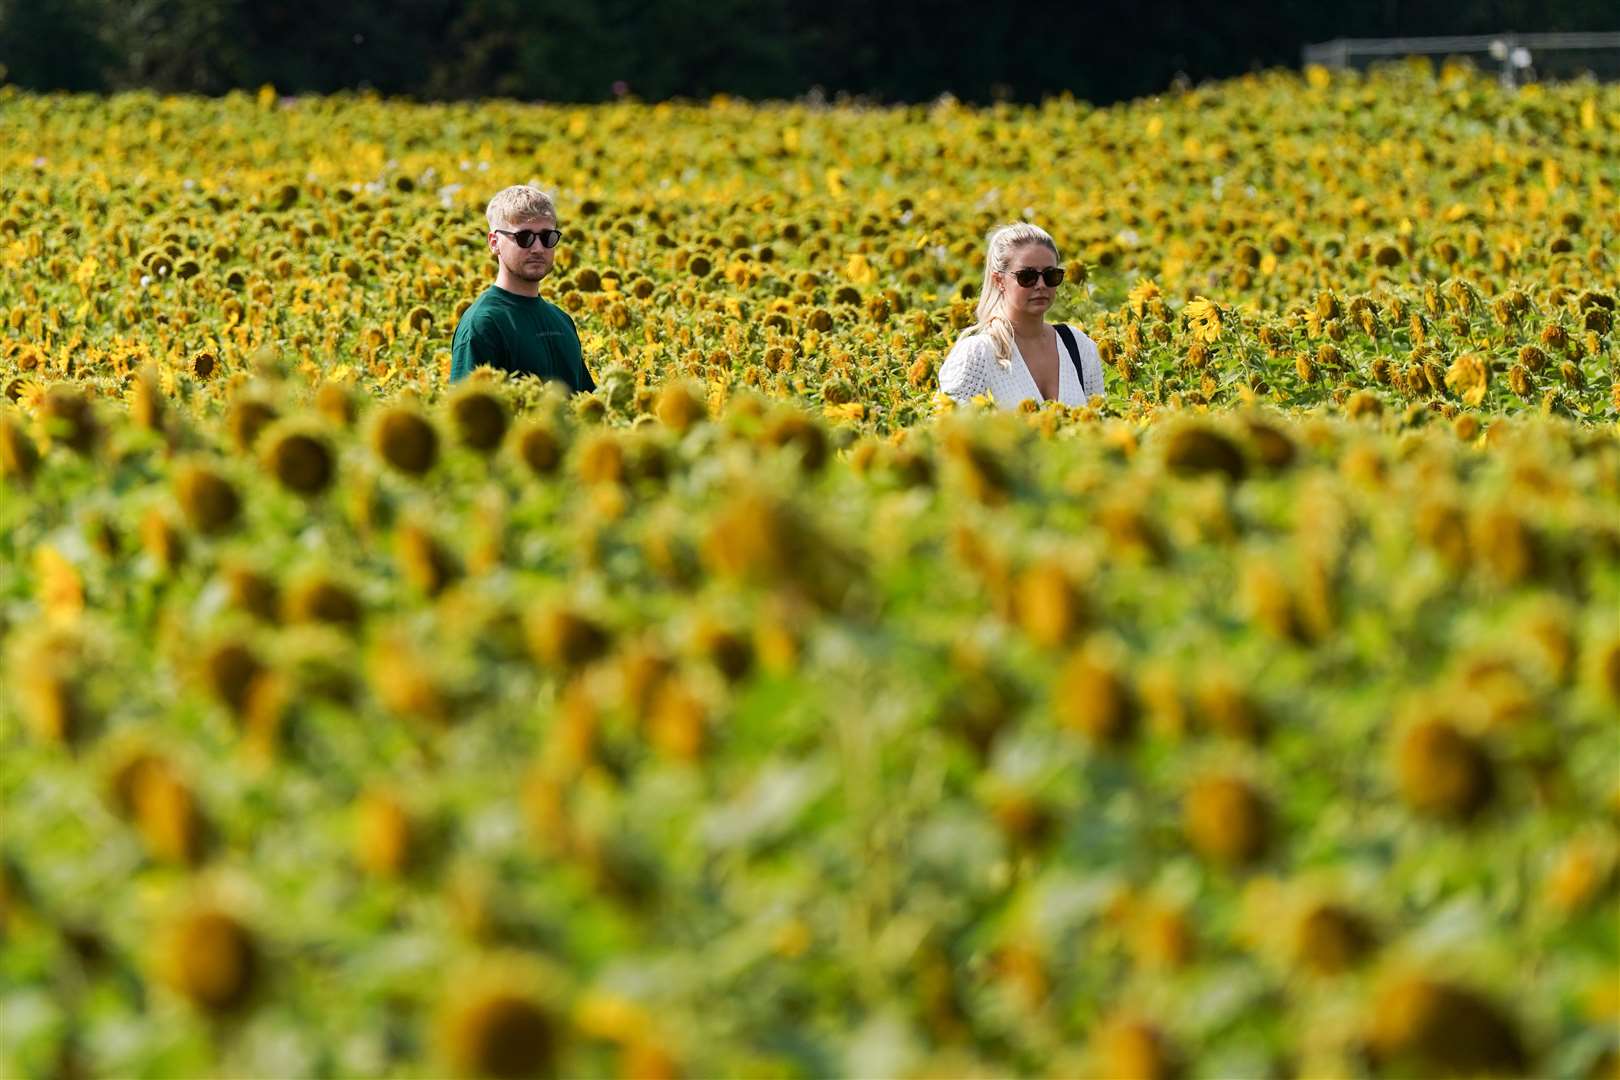 Visitors explore the sunflower fields at Becketts Farm in Wythall, south of Birmingham (Jacob King/PA)